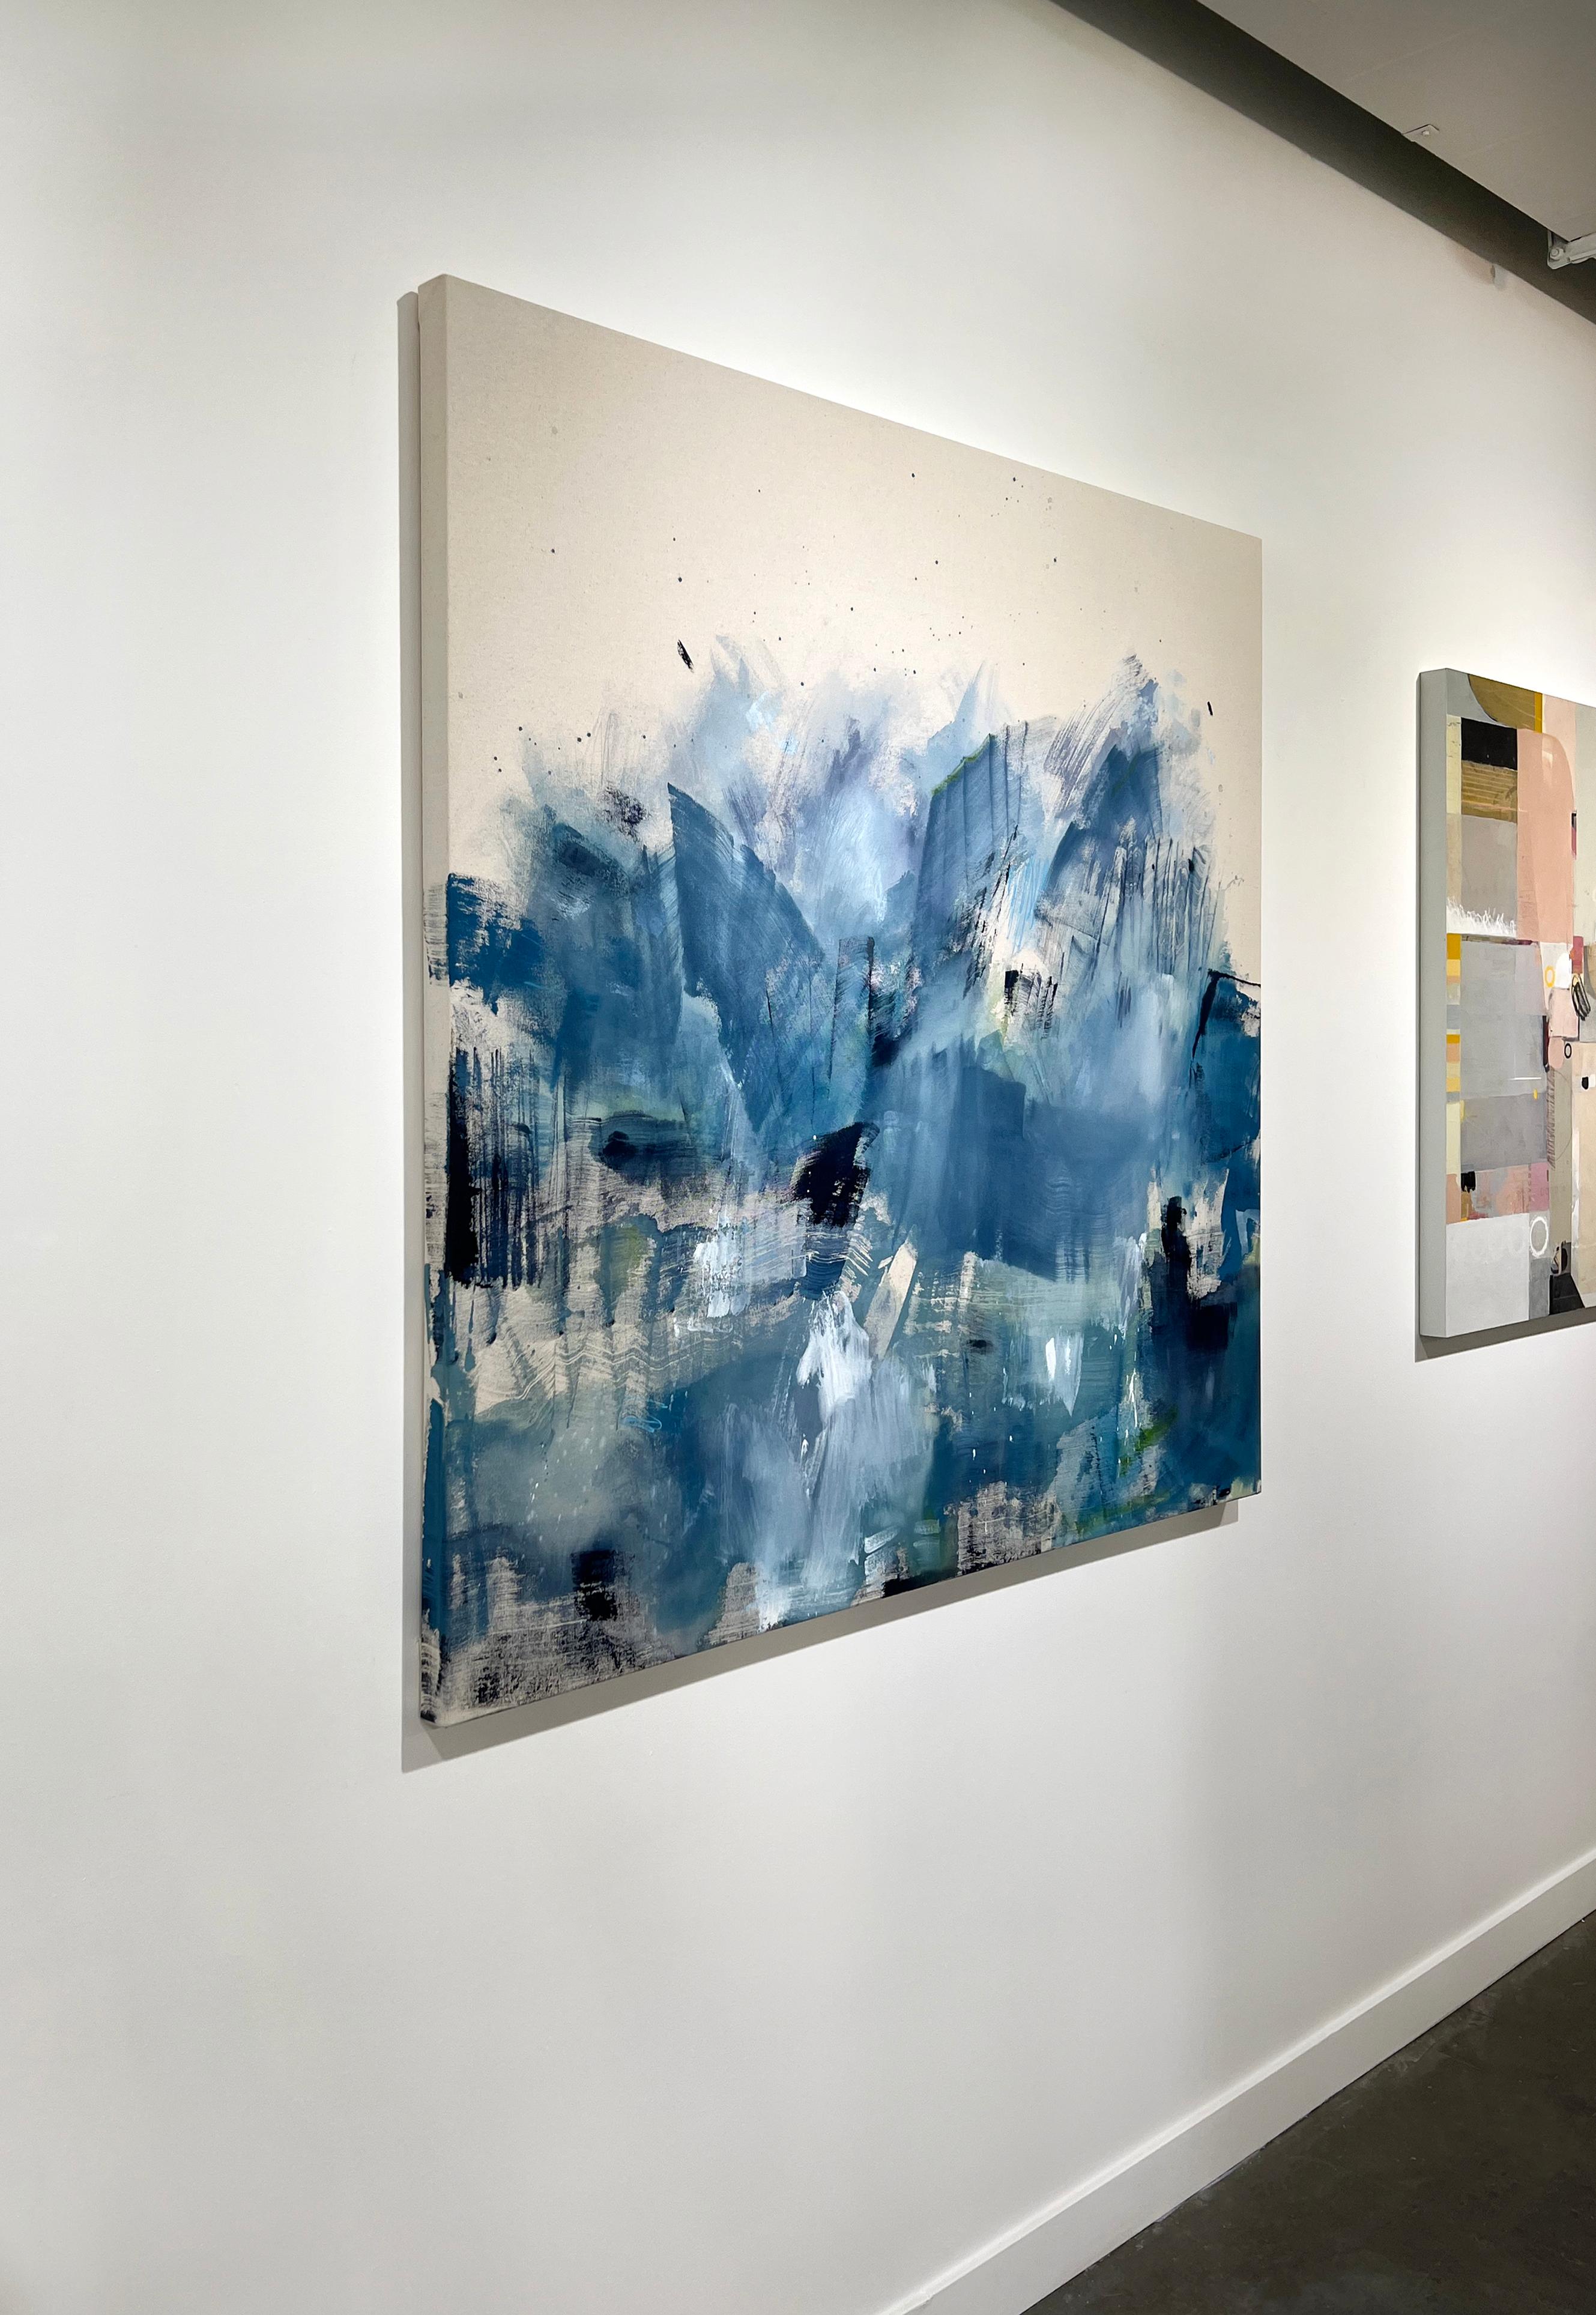 This abstract statement painting by Kelly Rossetti features a cool palette. Tones of muted blue are layered and washed together in large, expressive strokes, with accents of black, white, and green. The color extends from the bottom of the painting